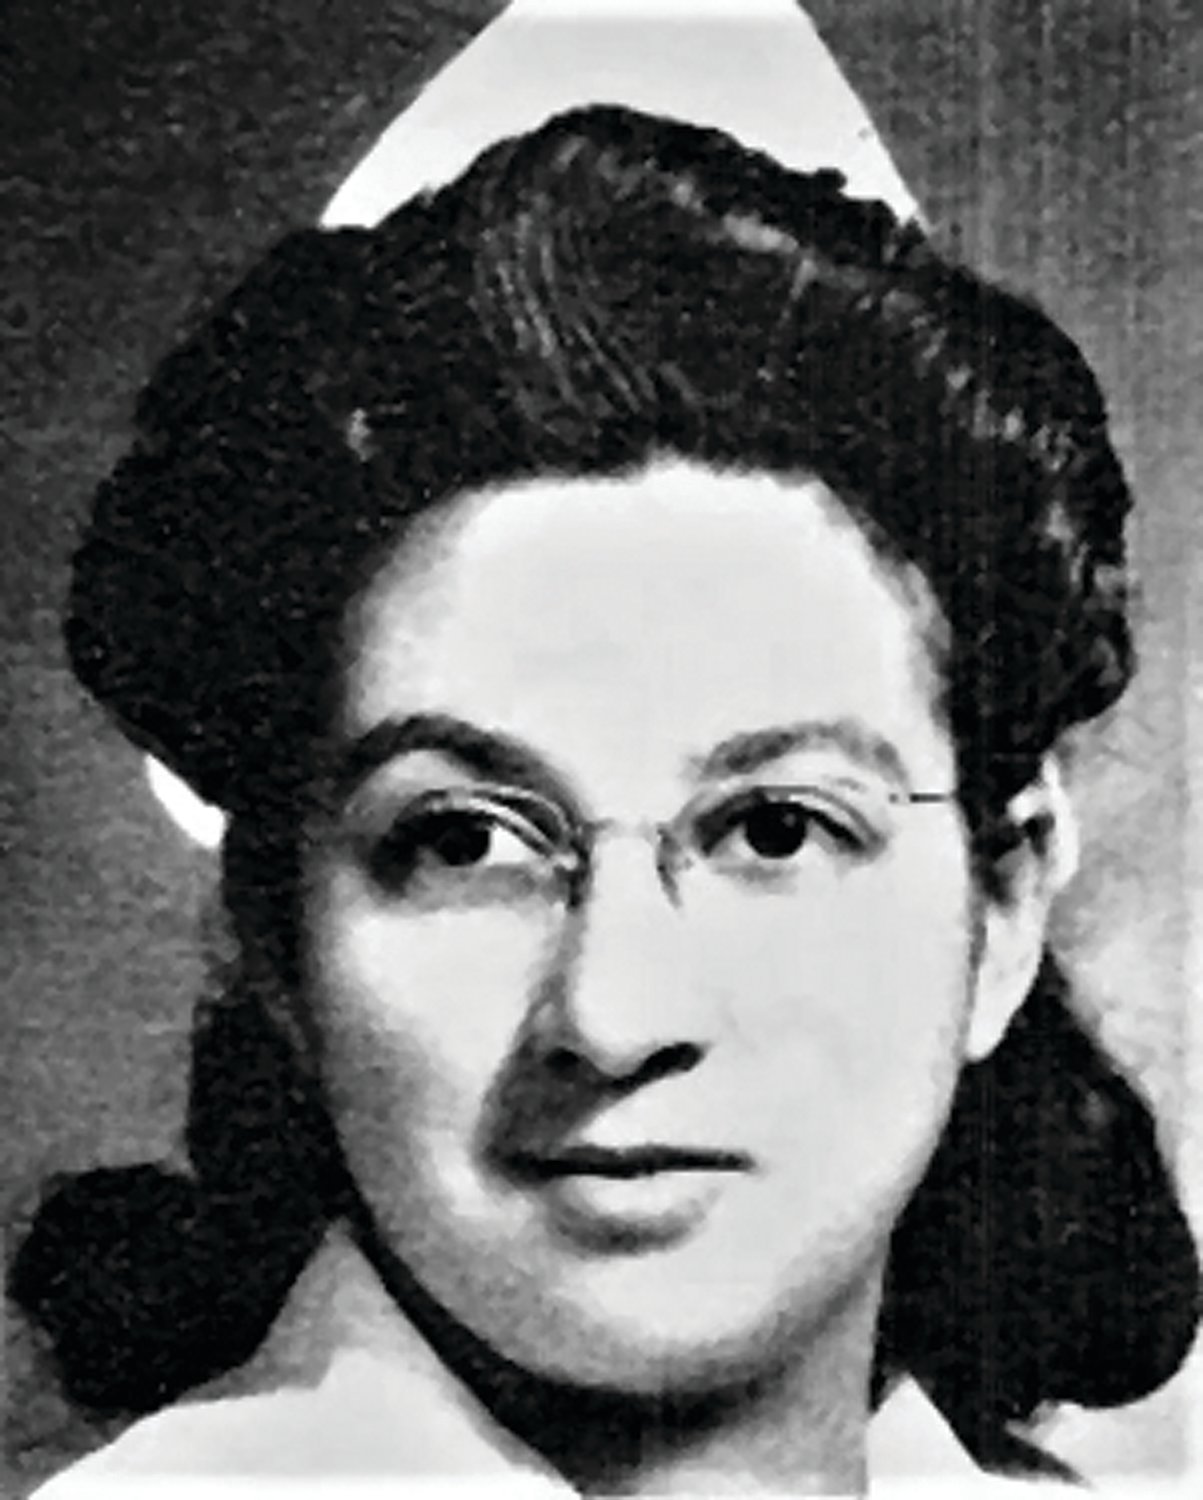 In 1953, Gladys Nickleby Nelson, a wife, mother of three, and a registered nurse, was the first African-American employed by the Doylestown Borough School System.